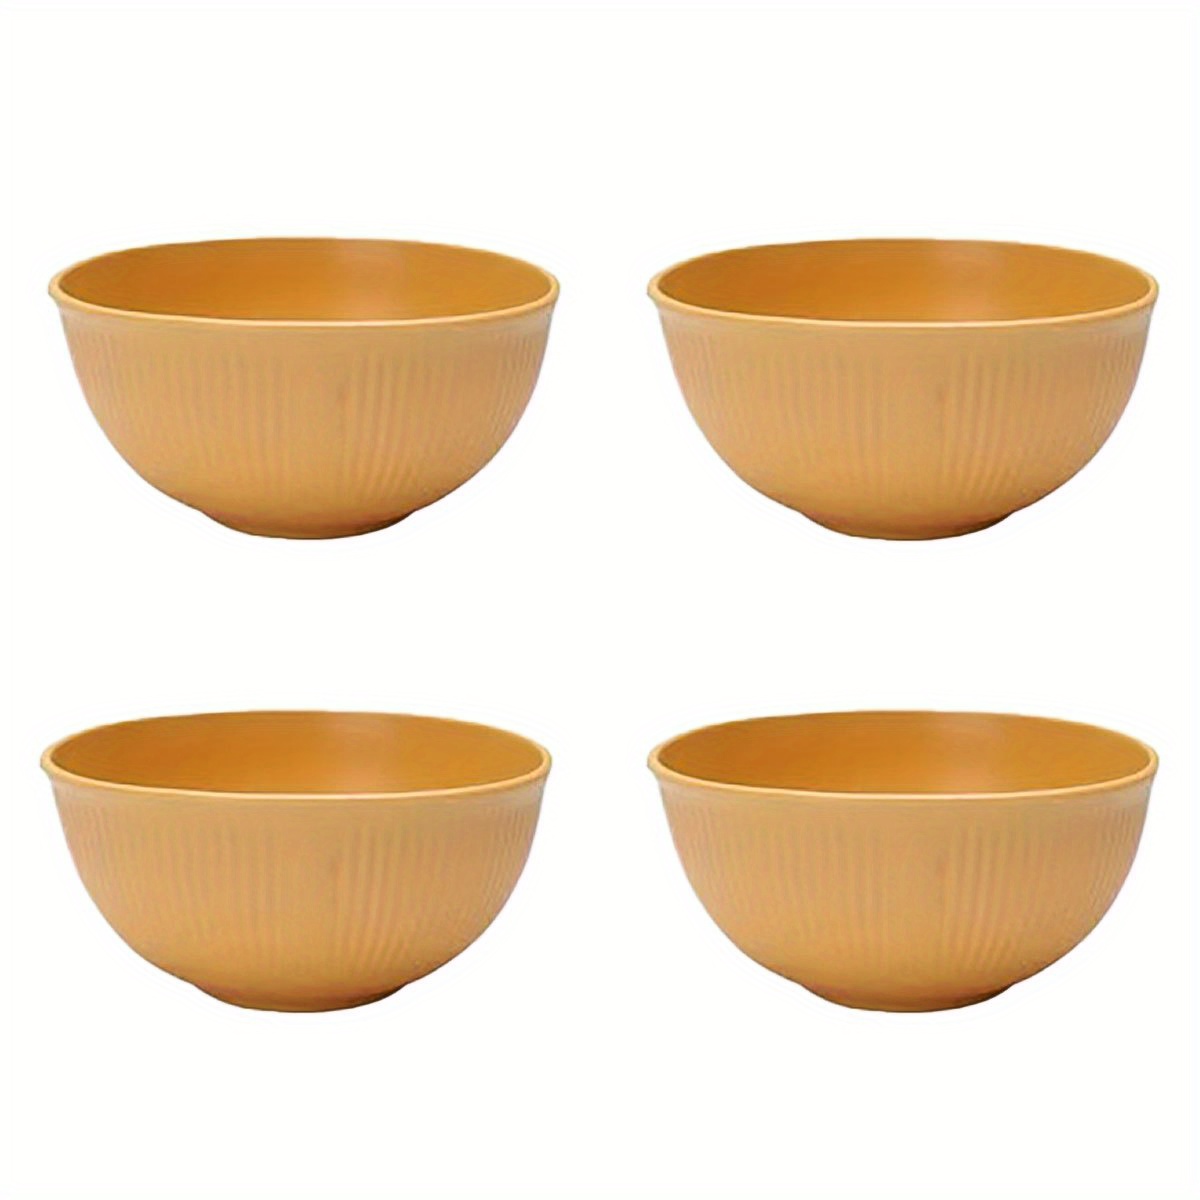 Unbreakable Wheat Straw Bowls, Cereal Bowls, Reusable Food Storage